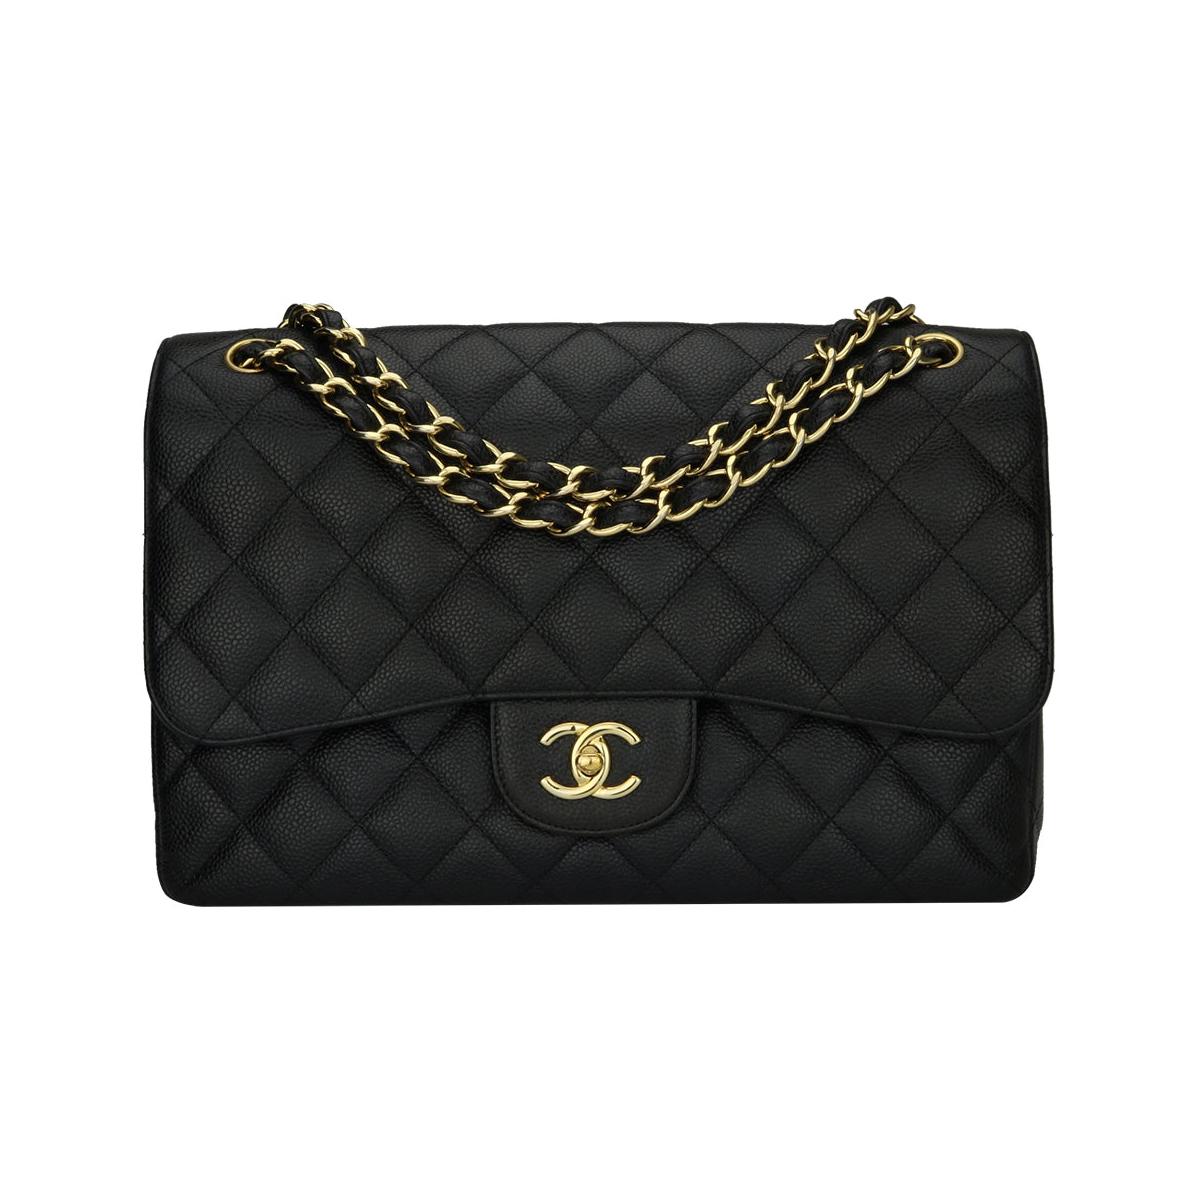 CHANEL Classic Jumbo Double Flap Black Caviar with Gold Hardware 2012